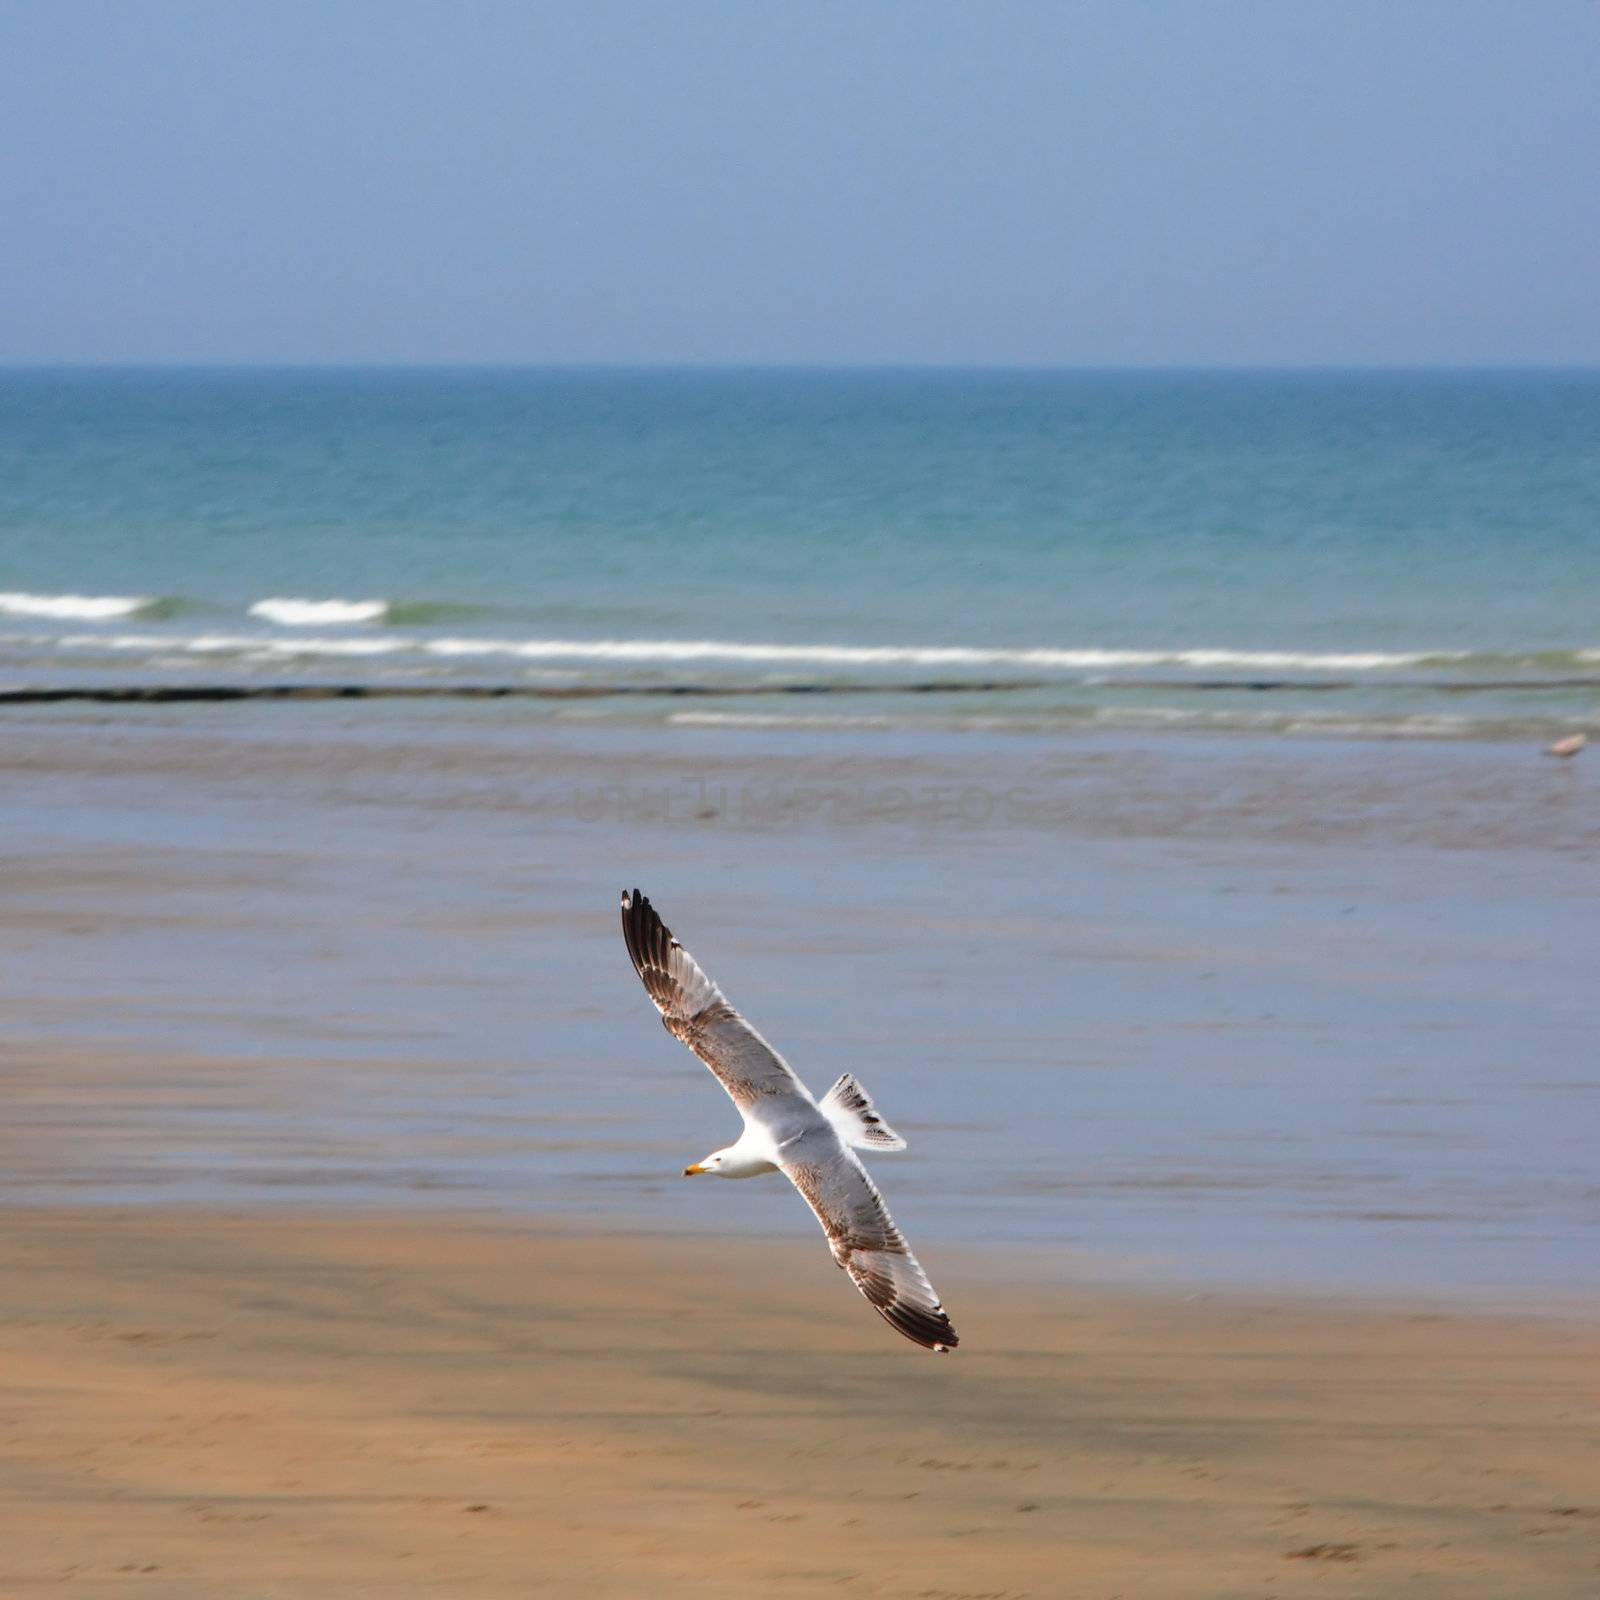 Seagull over a beach by Gravicapa